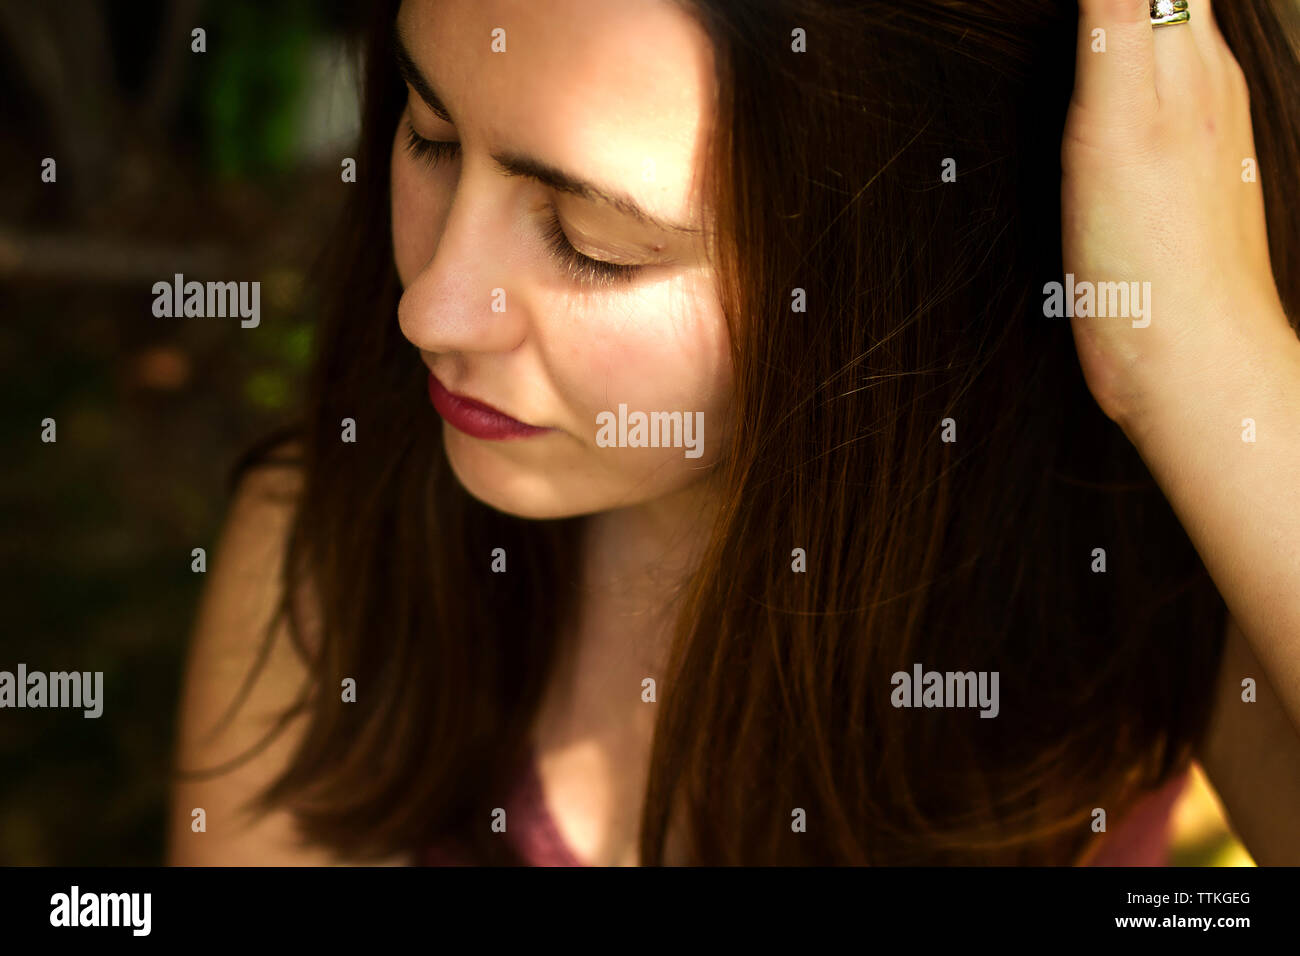 Close-up of woman with hand in hair Stock Photo